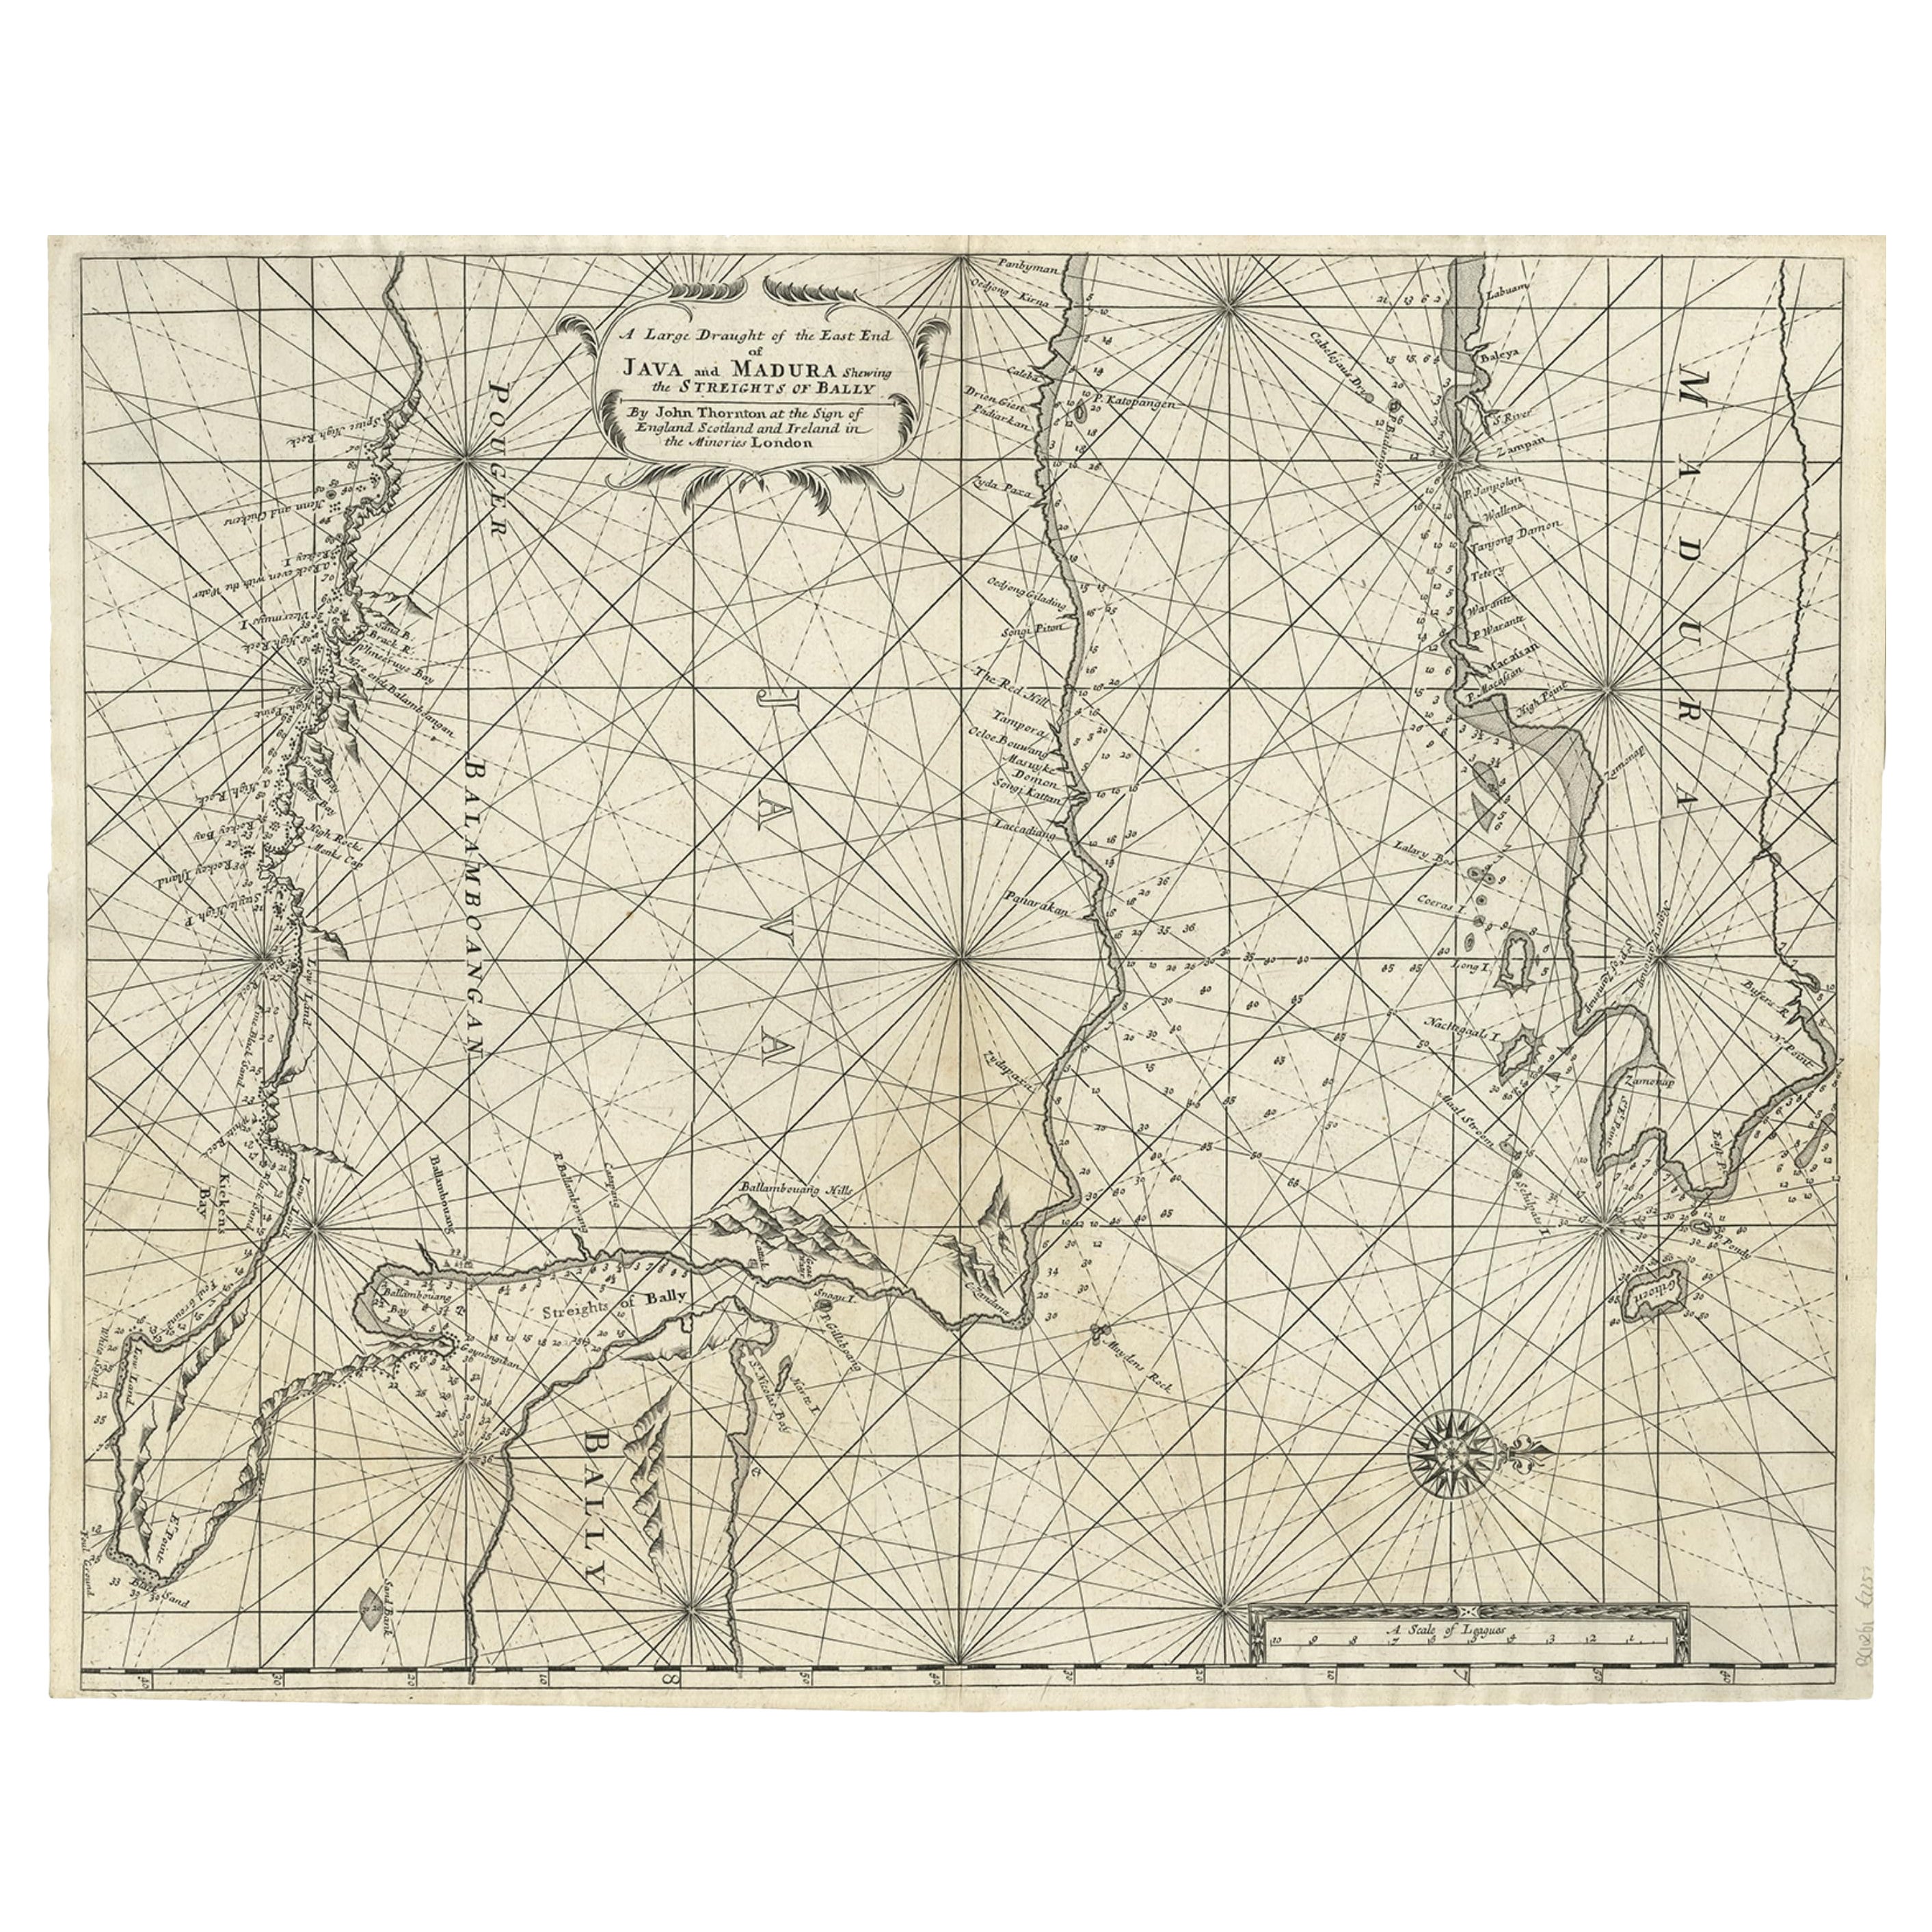 Rare Old English Sea Chart of Part of Indonesia with Java, Madura and Bali, 1711 For Sale